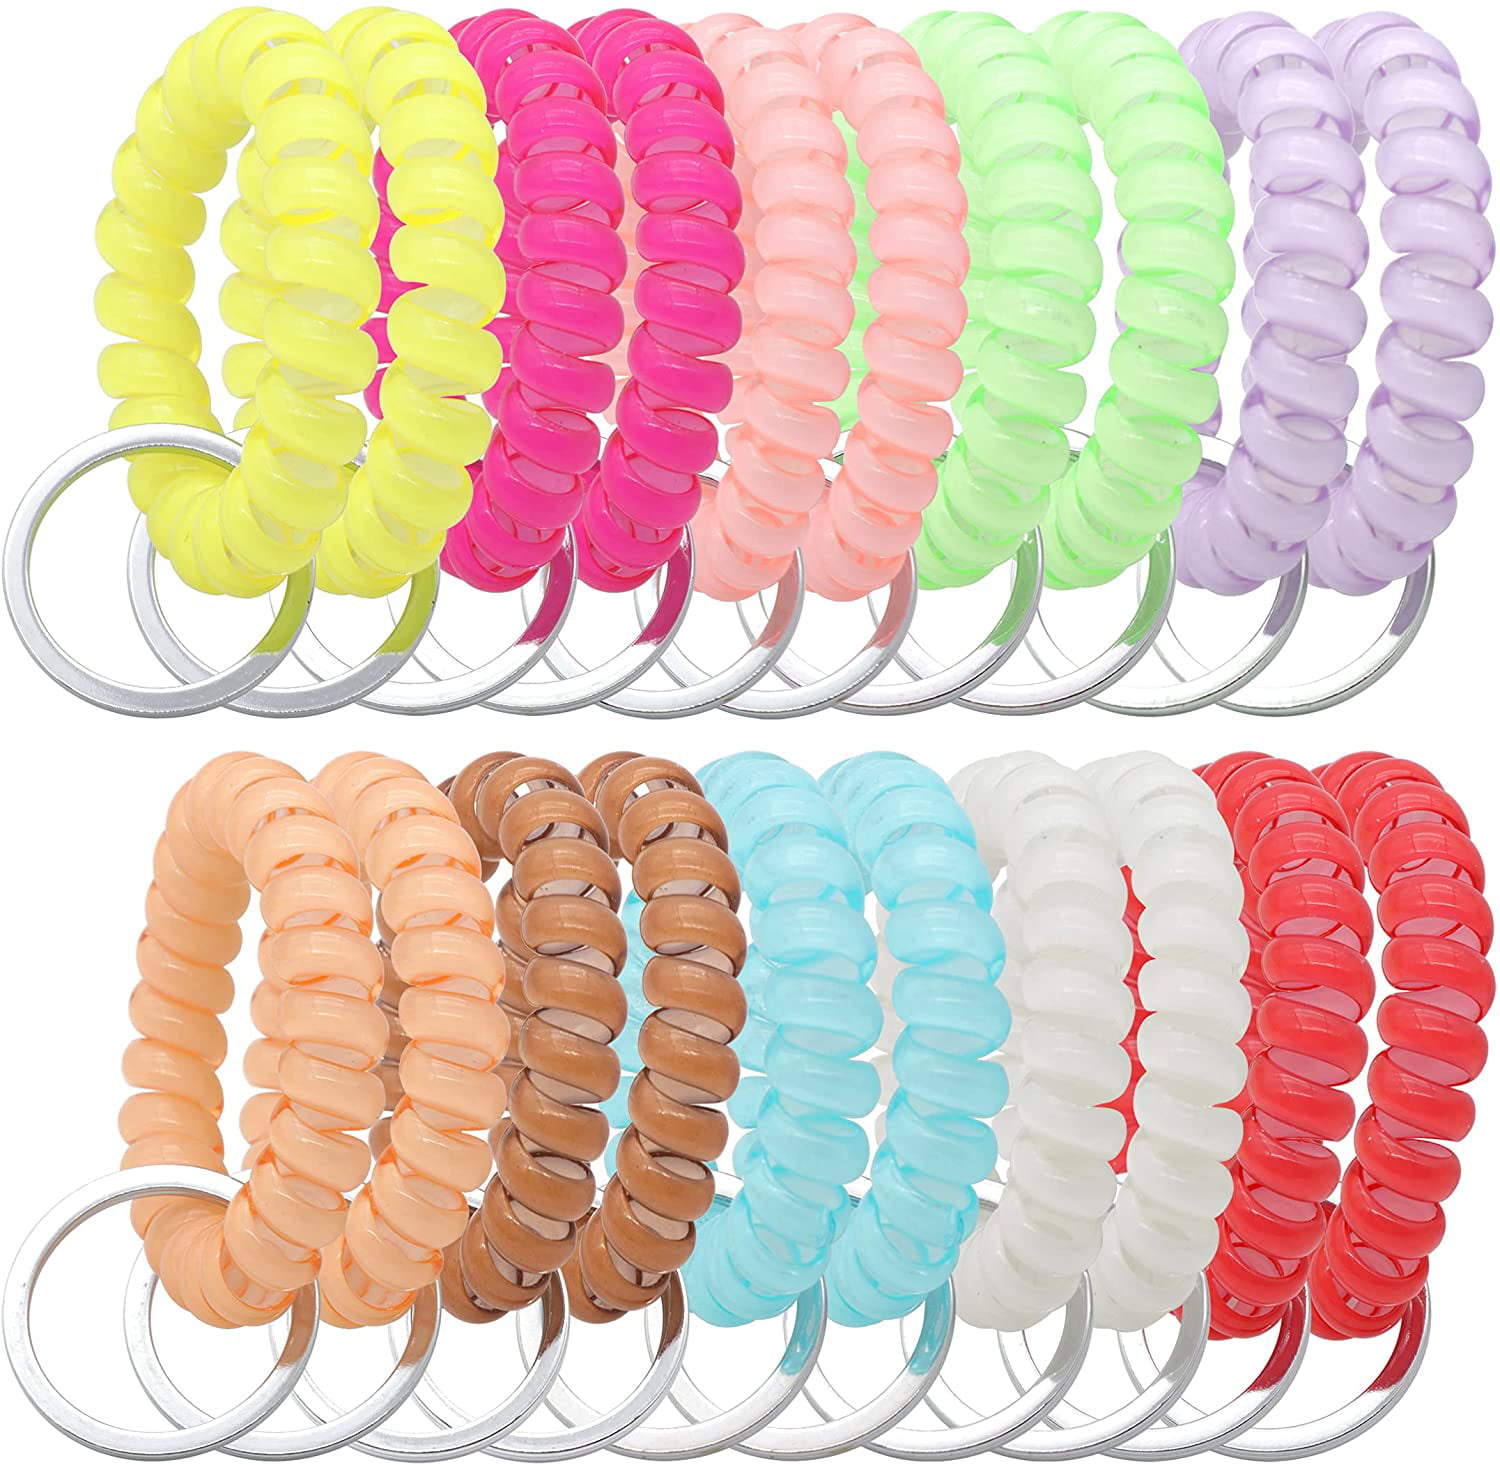 Sauna and Outdoor Activities Place 1 YAKA 20PCS Mix-colour Plastic Stretchable Spring Coil Key Chain-Spiral Coil Wrist Keychain for Office Workshop Shopping Mall 